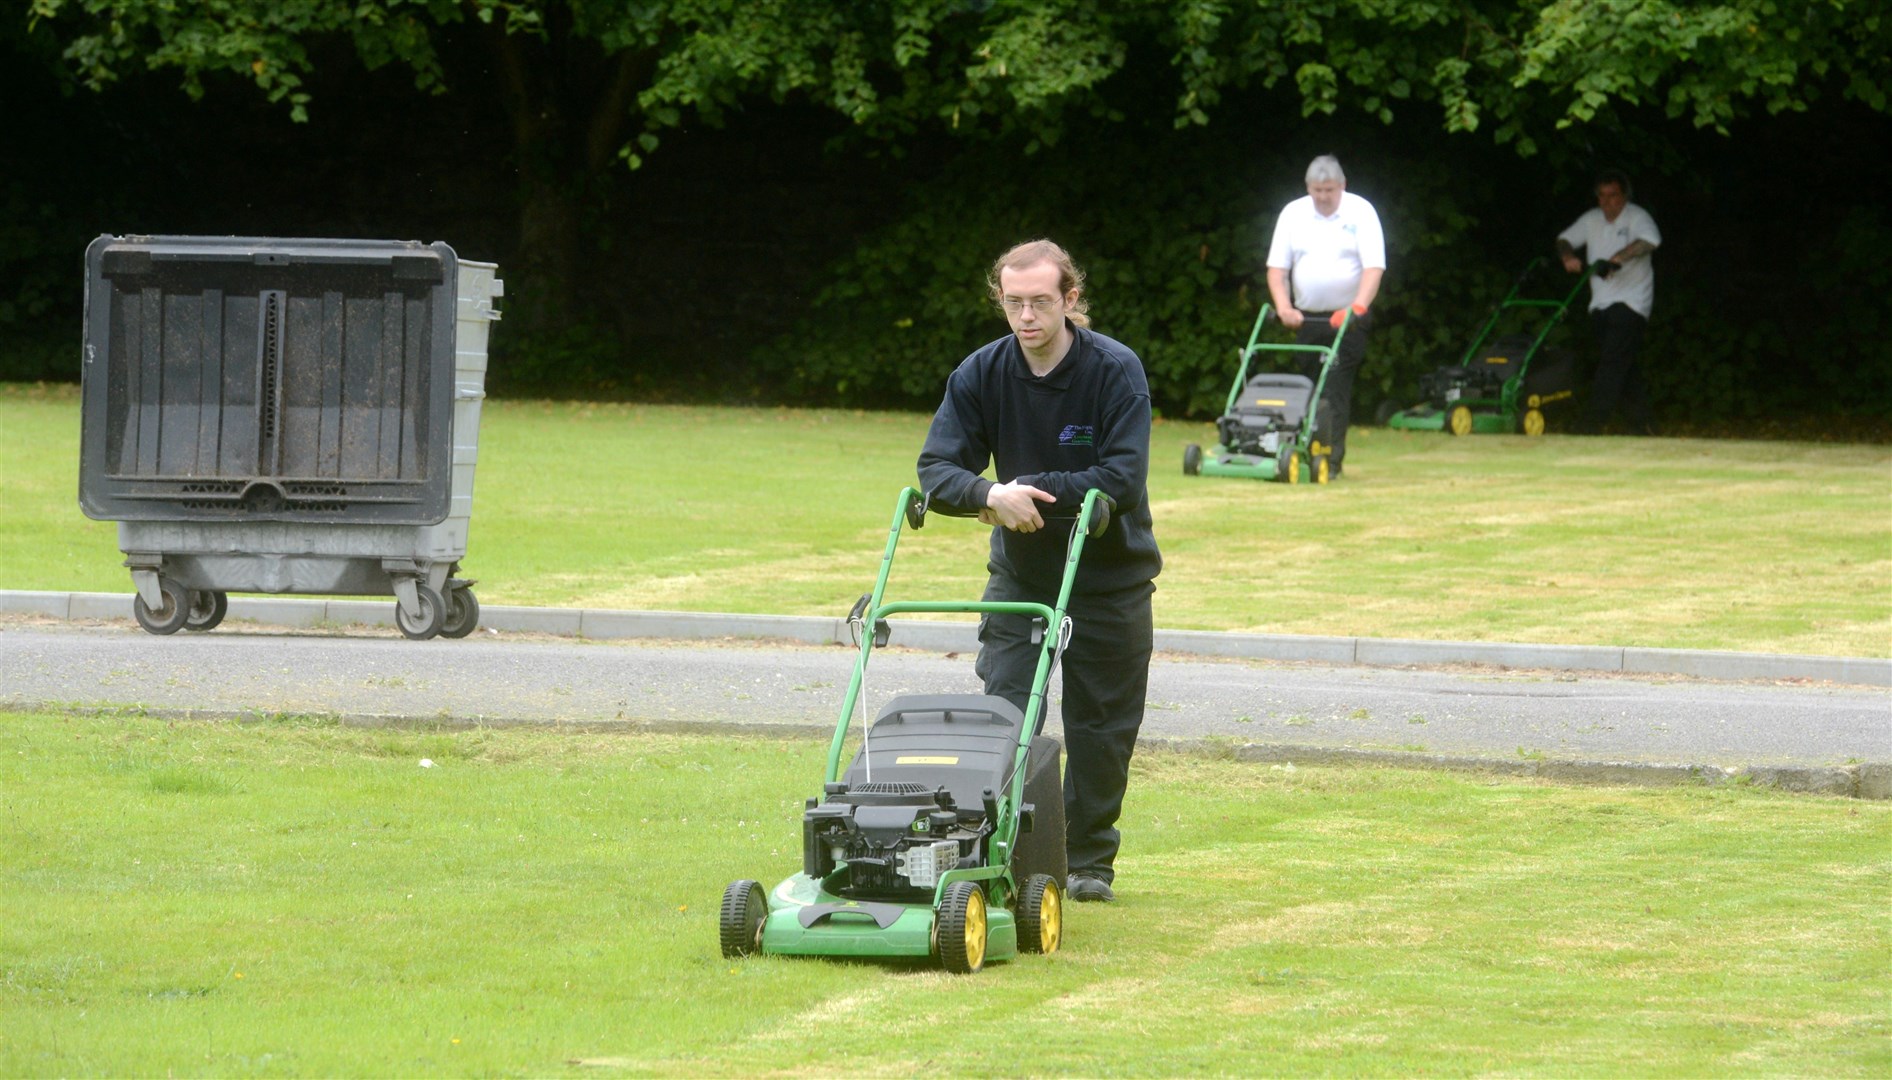 Grass cutting at the Highland Council headquarters in Inverness (file image).